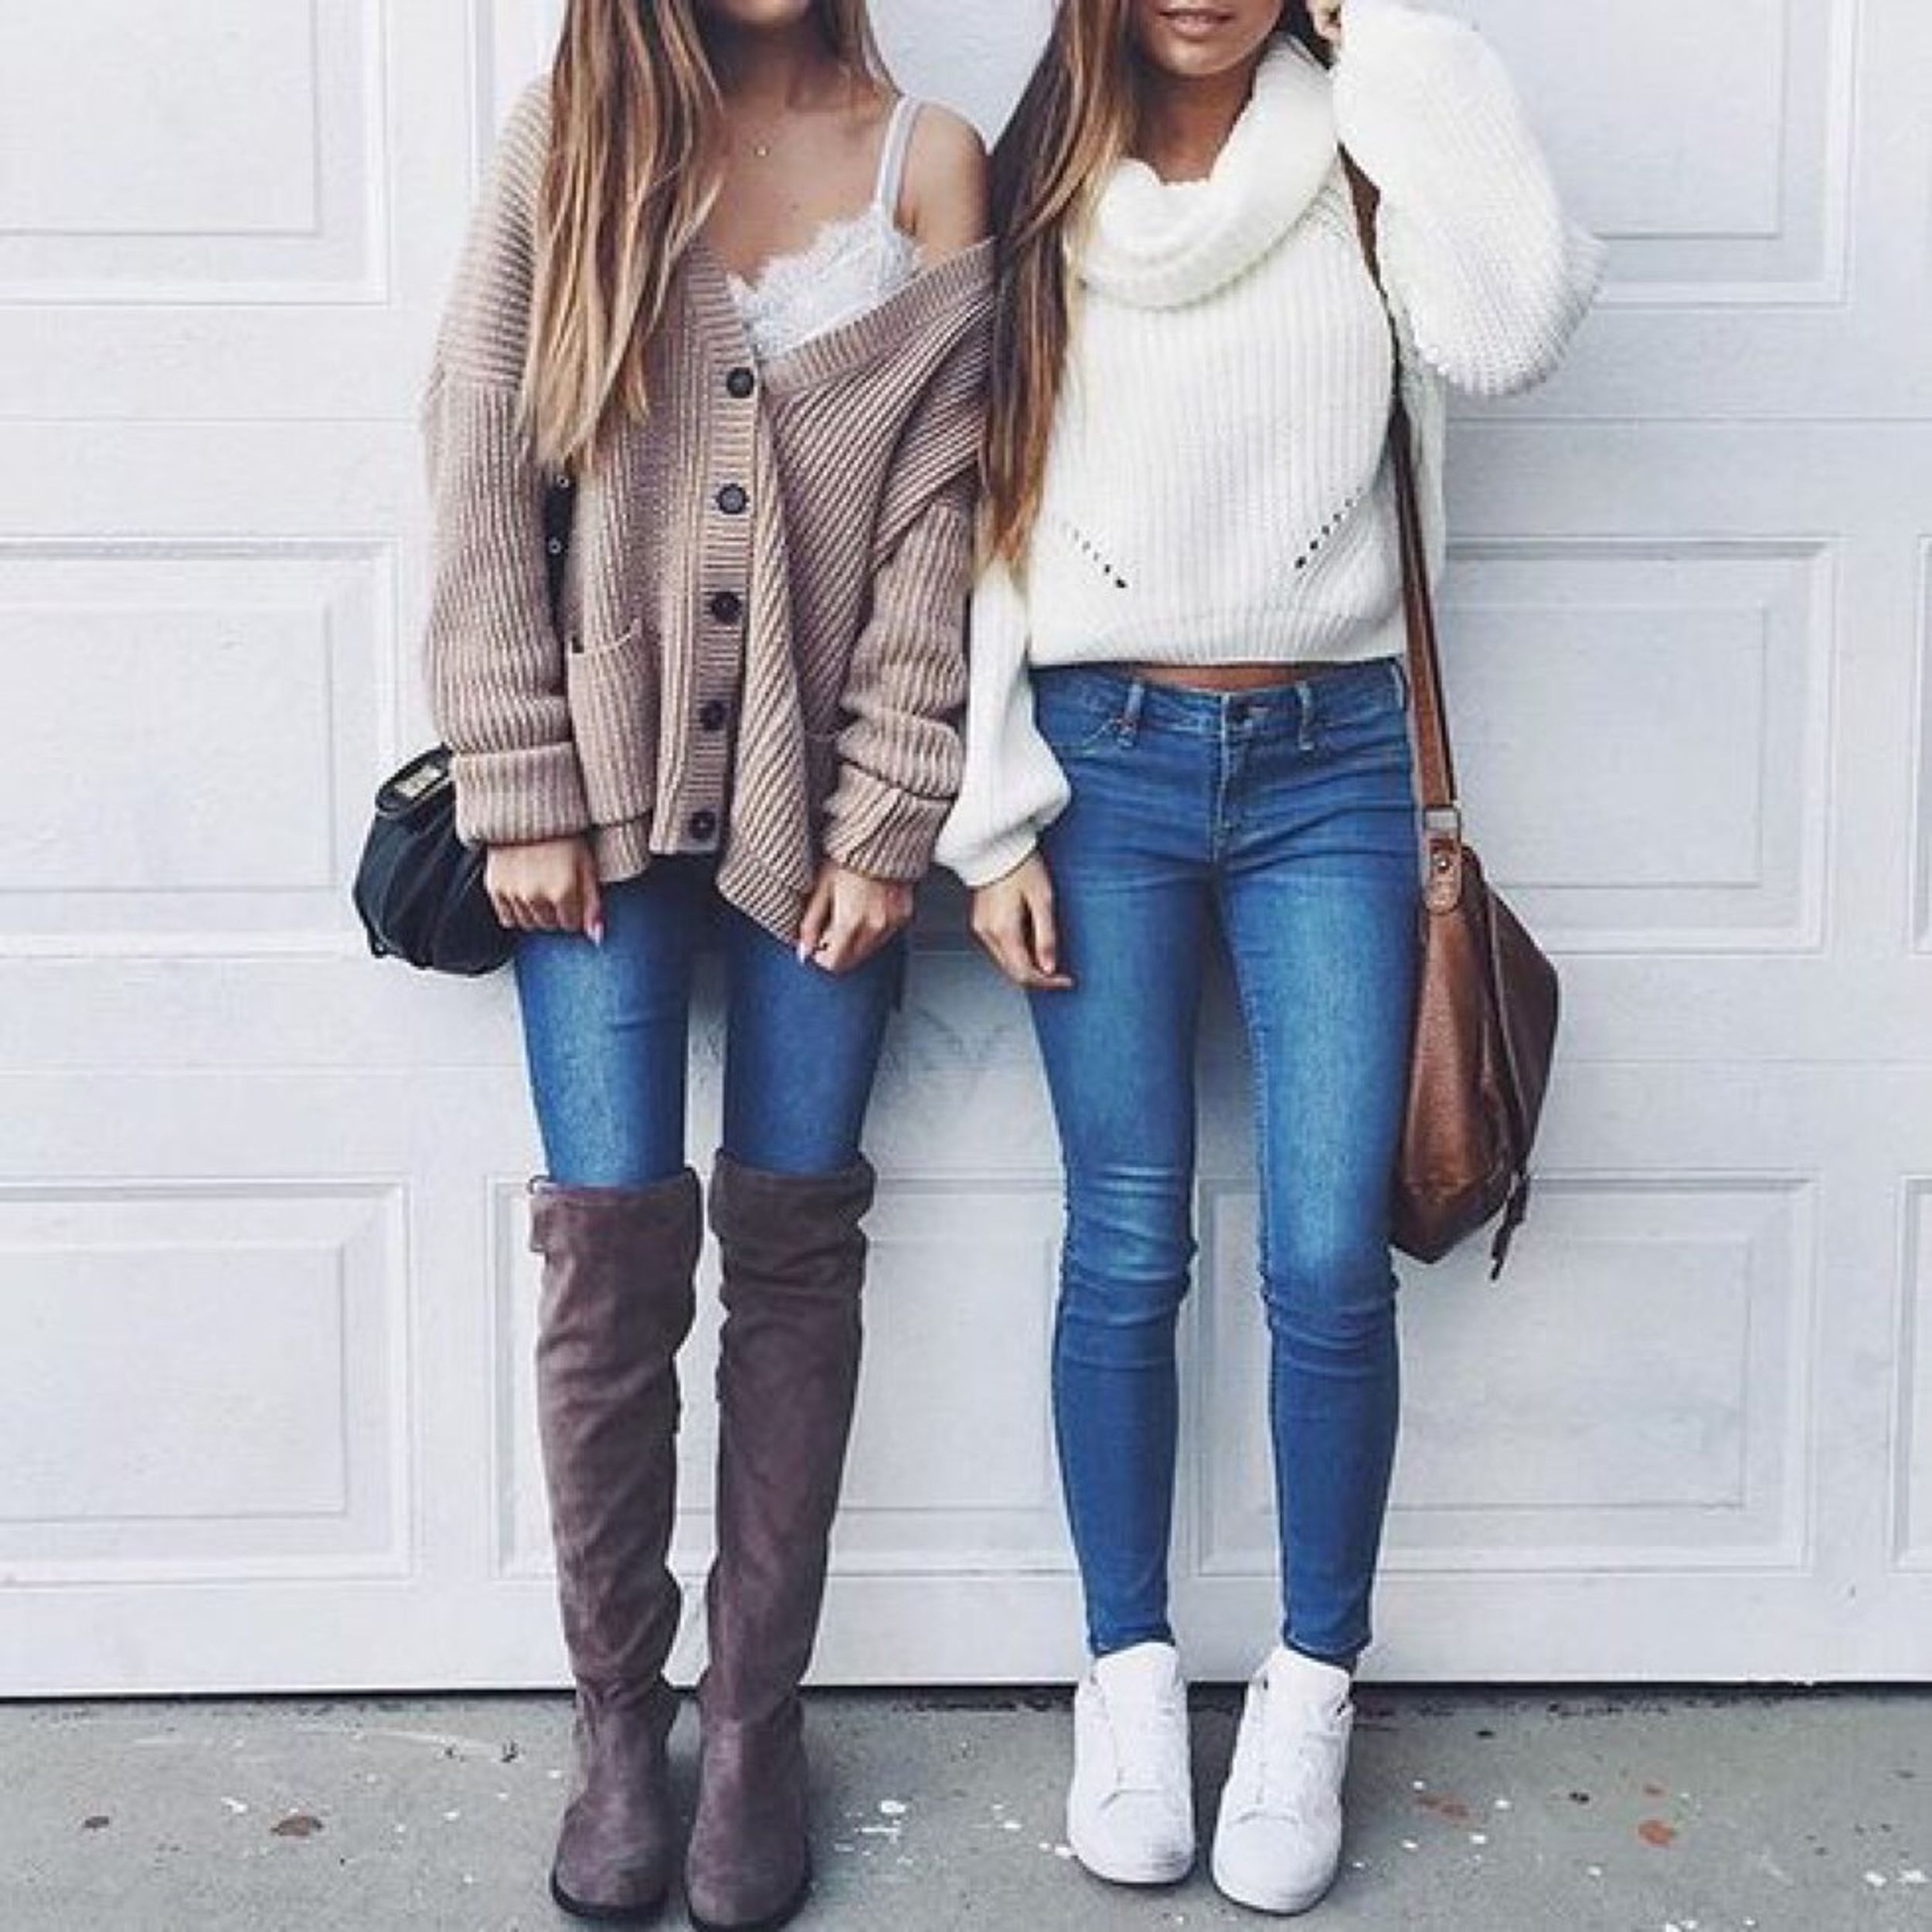 The Do's And Don't's Of College Fashion